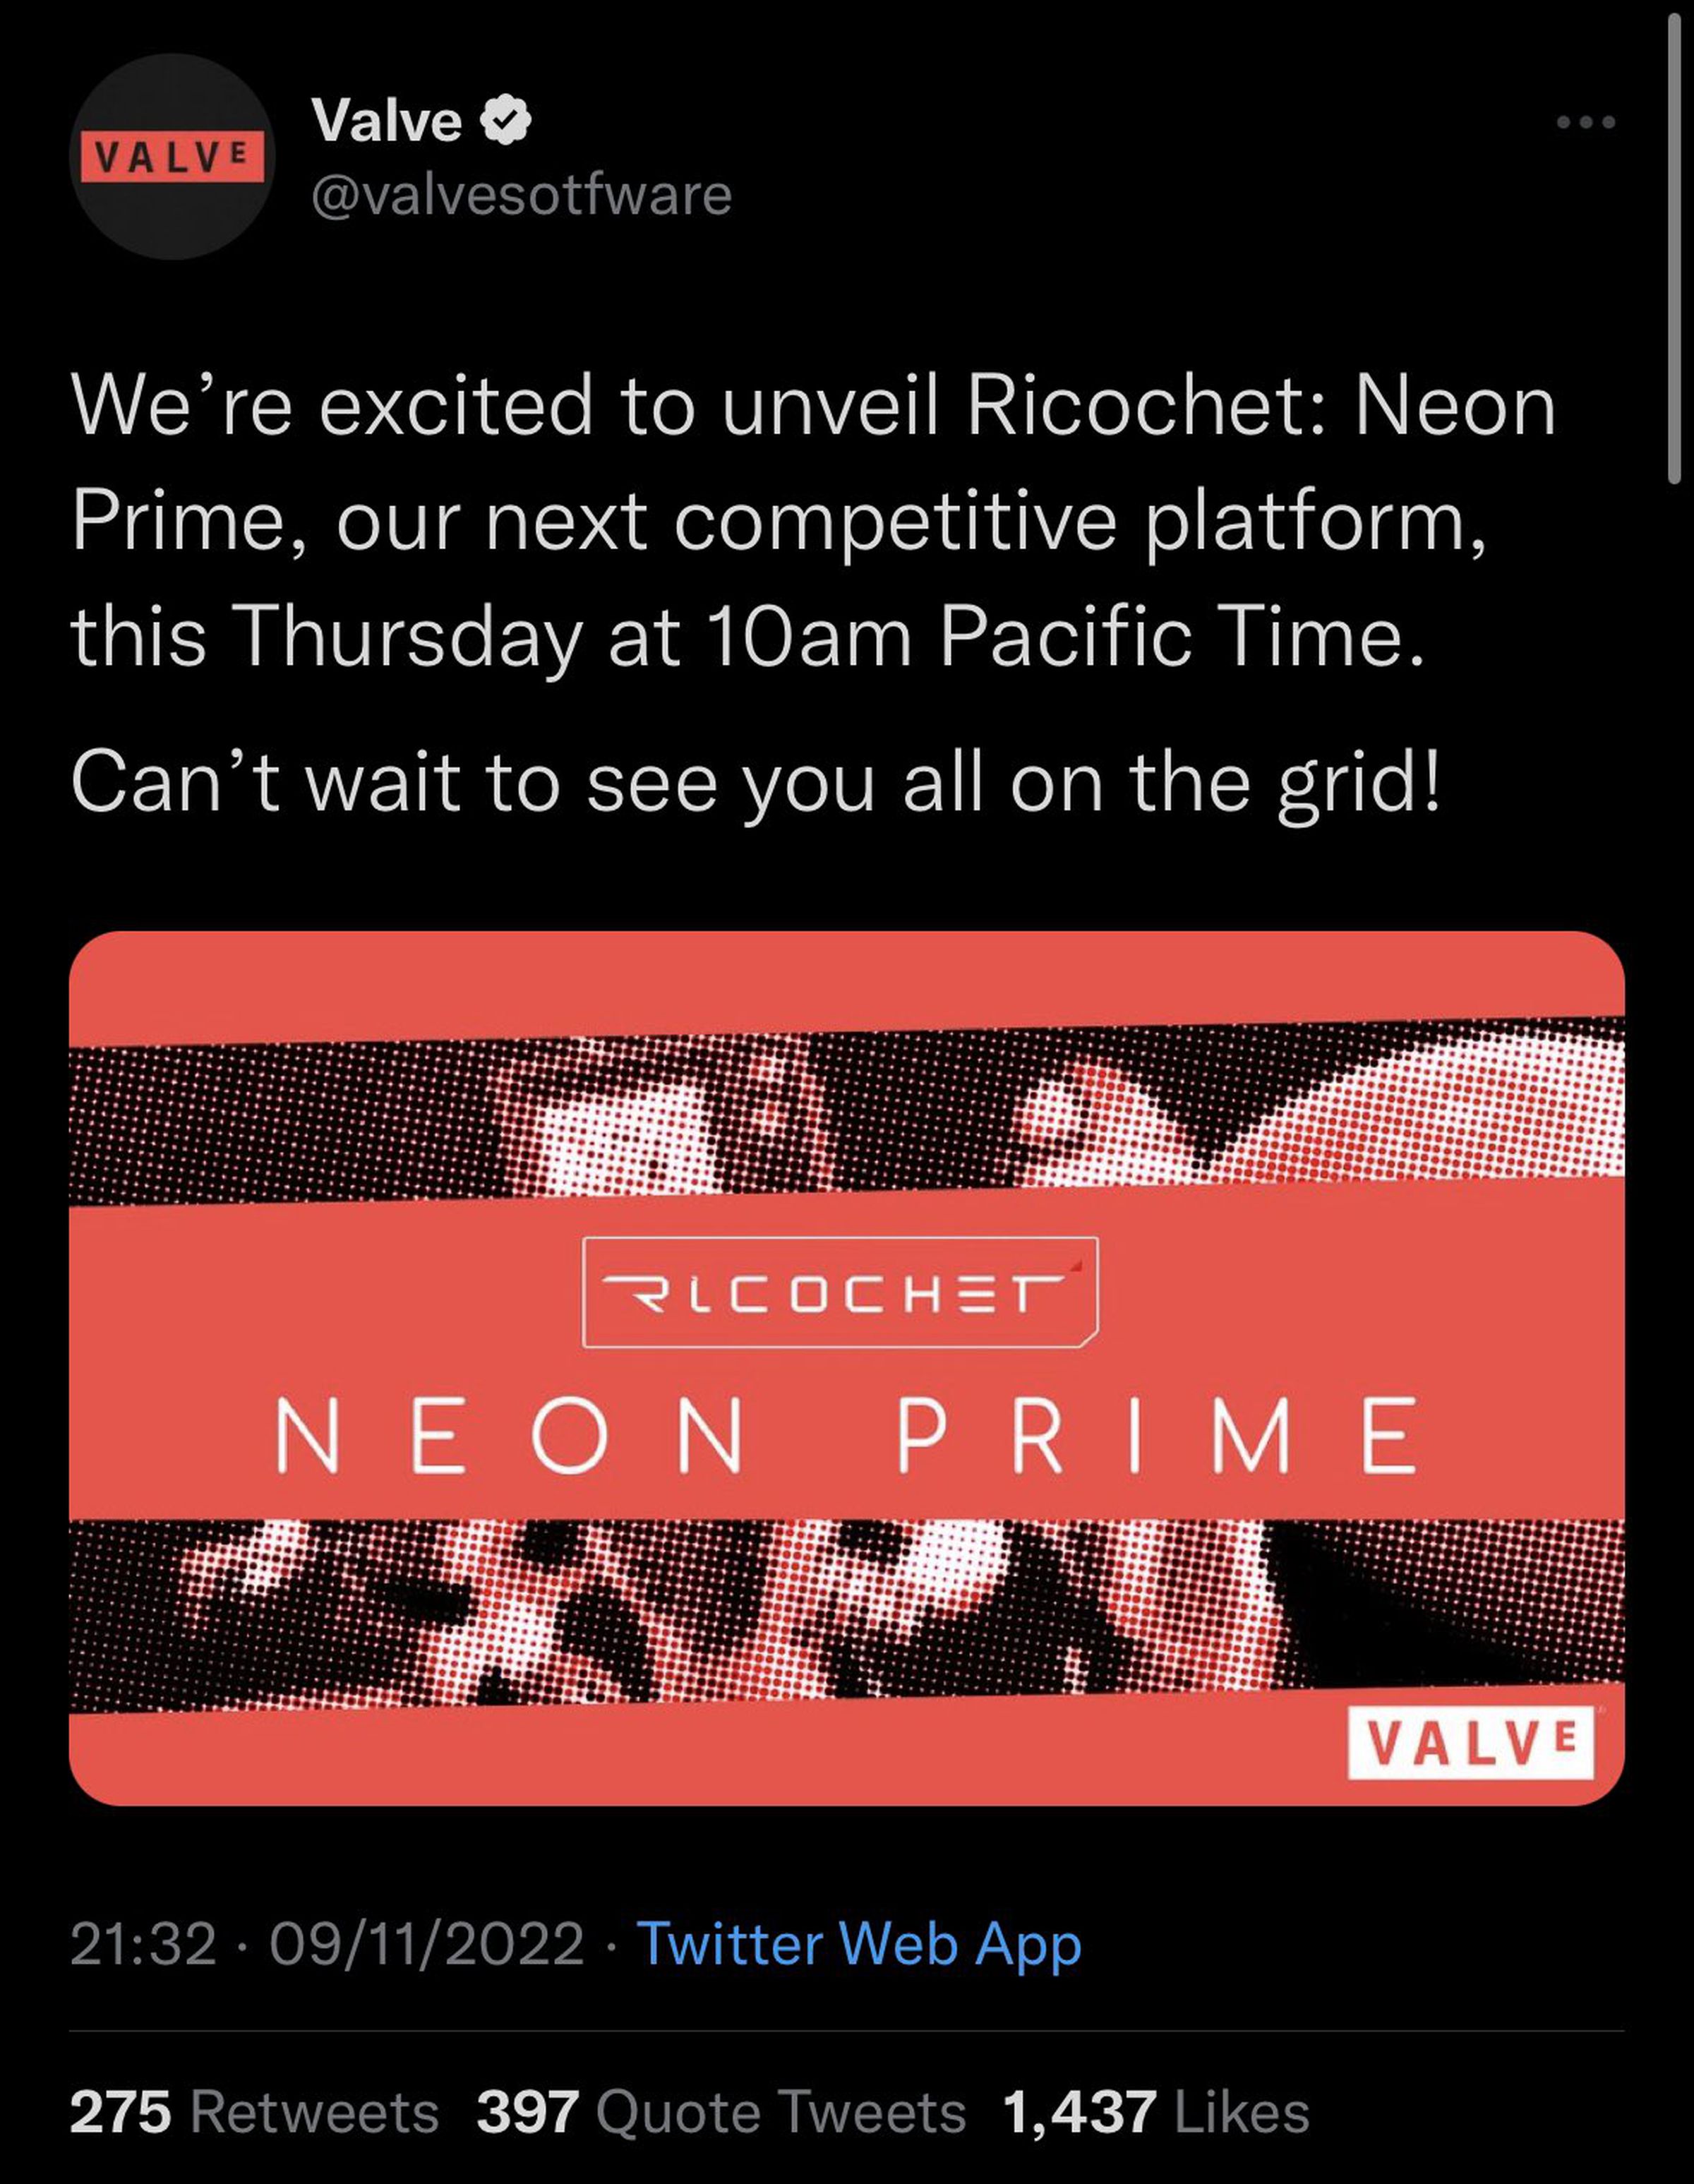 Neon Prime is a phrase Valve trademarked, but it’s probably not for a return of its disc-throwing game Ricochet.